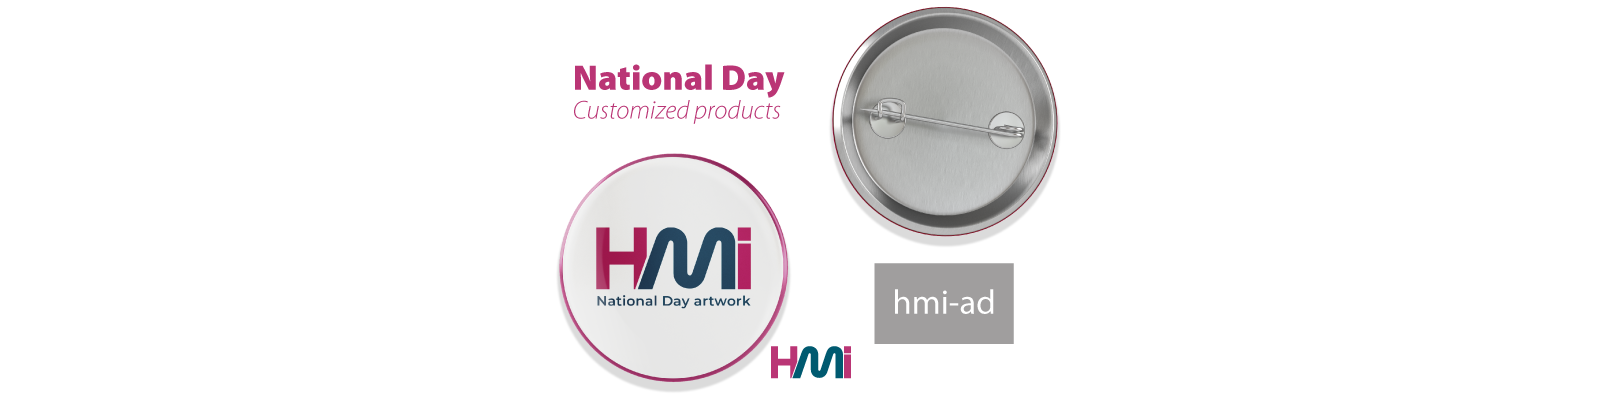 National Day Customized Products in Germany by hmi gmbh | HMi offers National and unity day gift items in Germany on hmi-ad | giveaways with branding